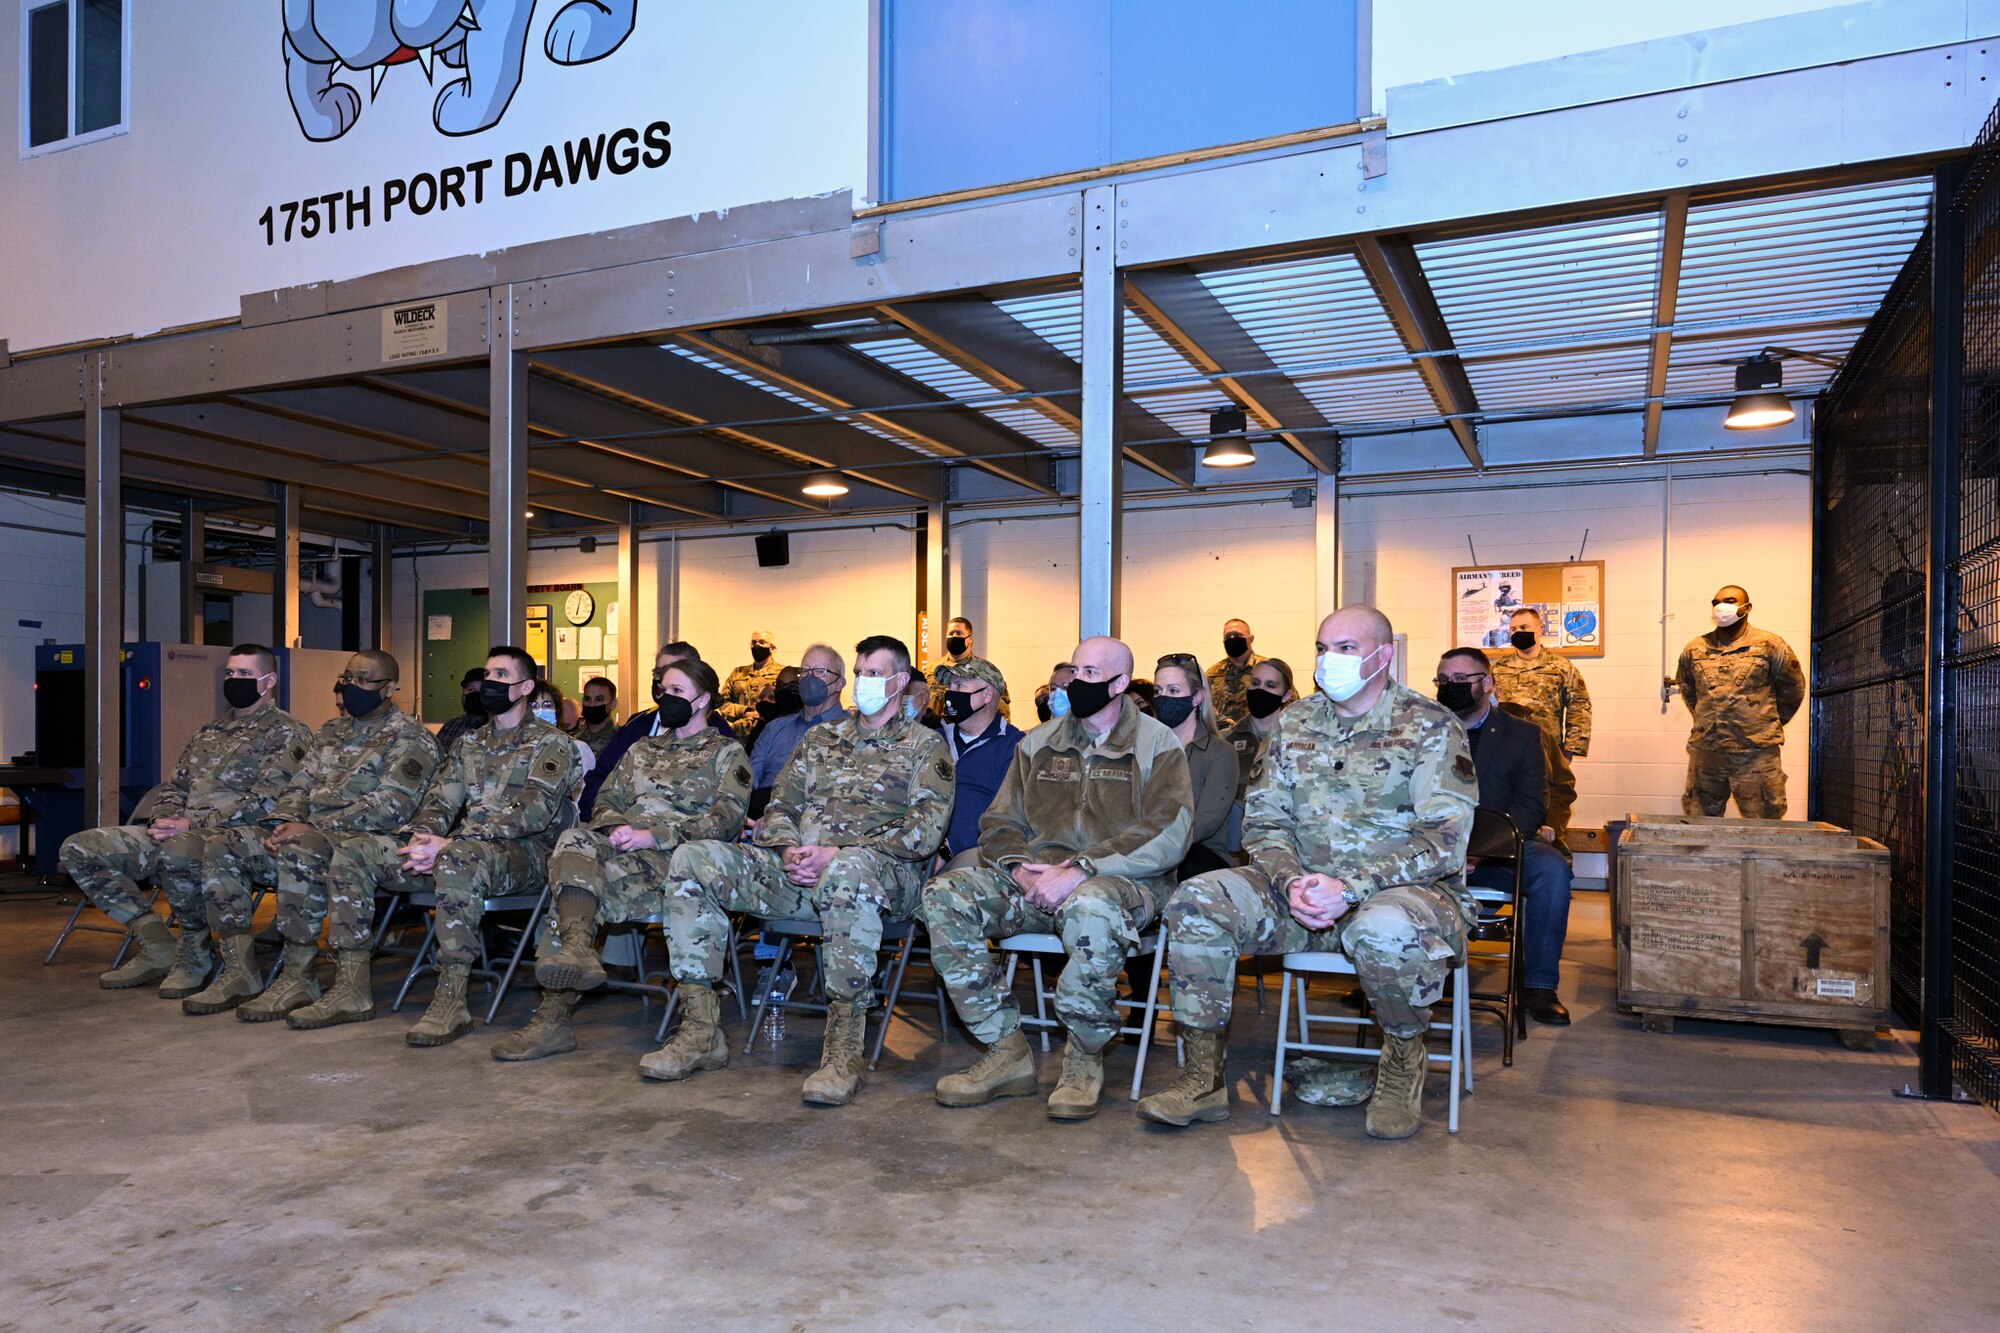 Members from the Maryland Air National Guard both active and retired, gathered to witness the deactivation of the Small Air Terminal Feb. 12, 2022, at Warfield Air National Guard Base, Middle River, Maryland. The 135th Aerial Port Flight was part of the Maryland Air National Guard from 1976, when it was activated at Martin State Airport, to 2008. Due to a decrease in personnel, the 135th APF transitioned to the Small Air Terminal, under the 175th Logistics Readiness Squadron. (U.S. Air National Guard photo by Senior Airman Danielle Lofton)